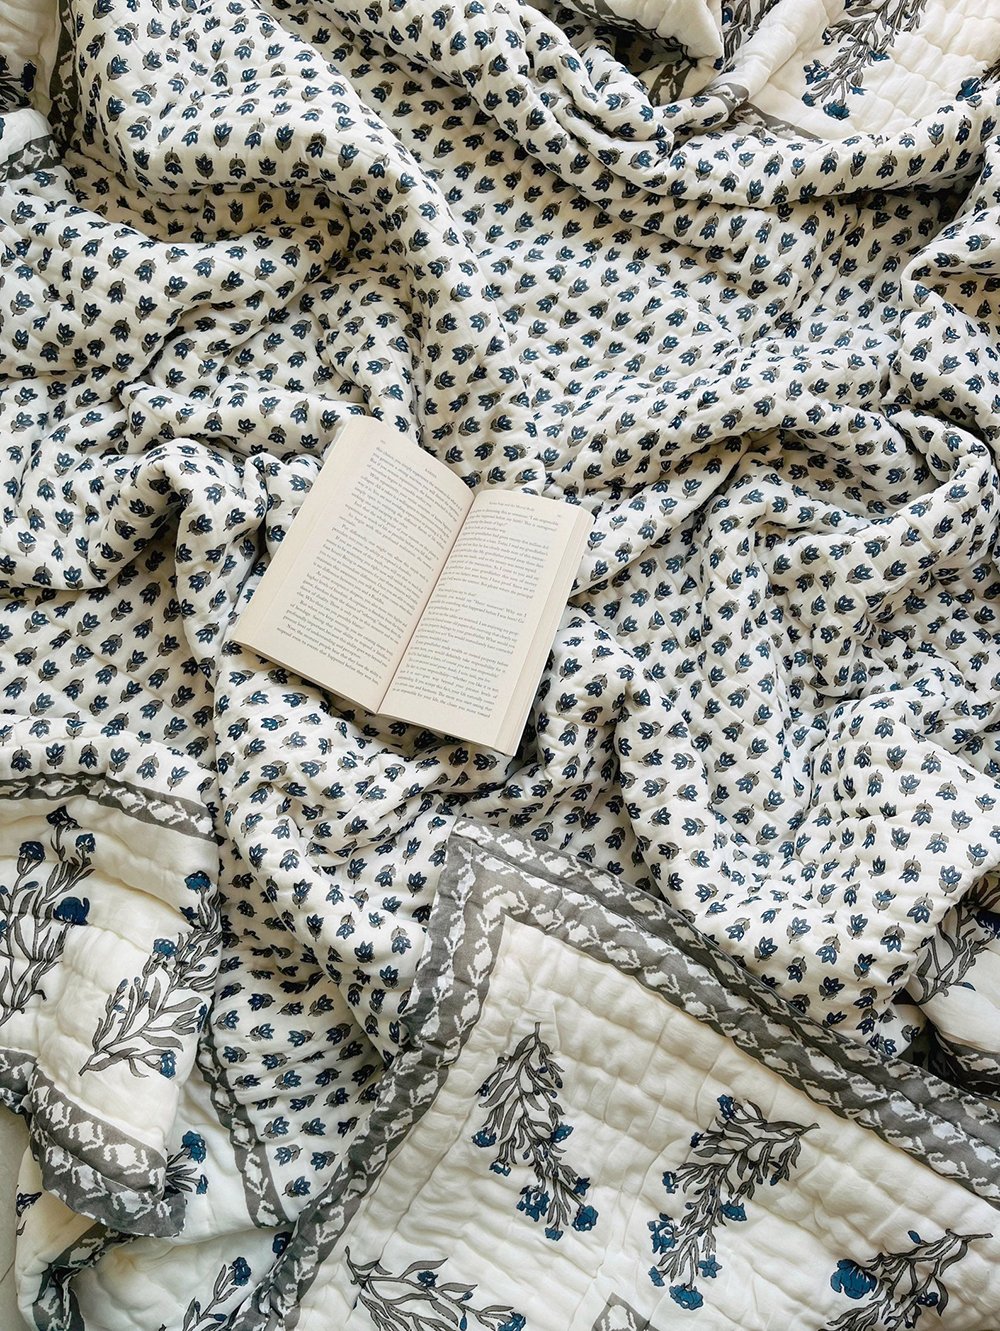 Best of Etsy : Patterned Quilts - roomfortuesday.com